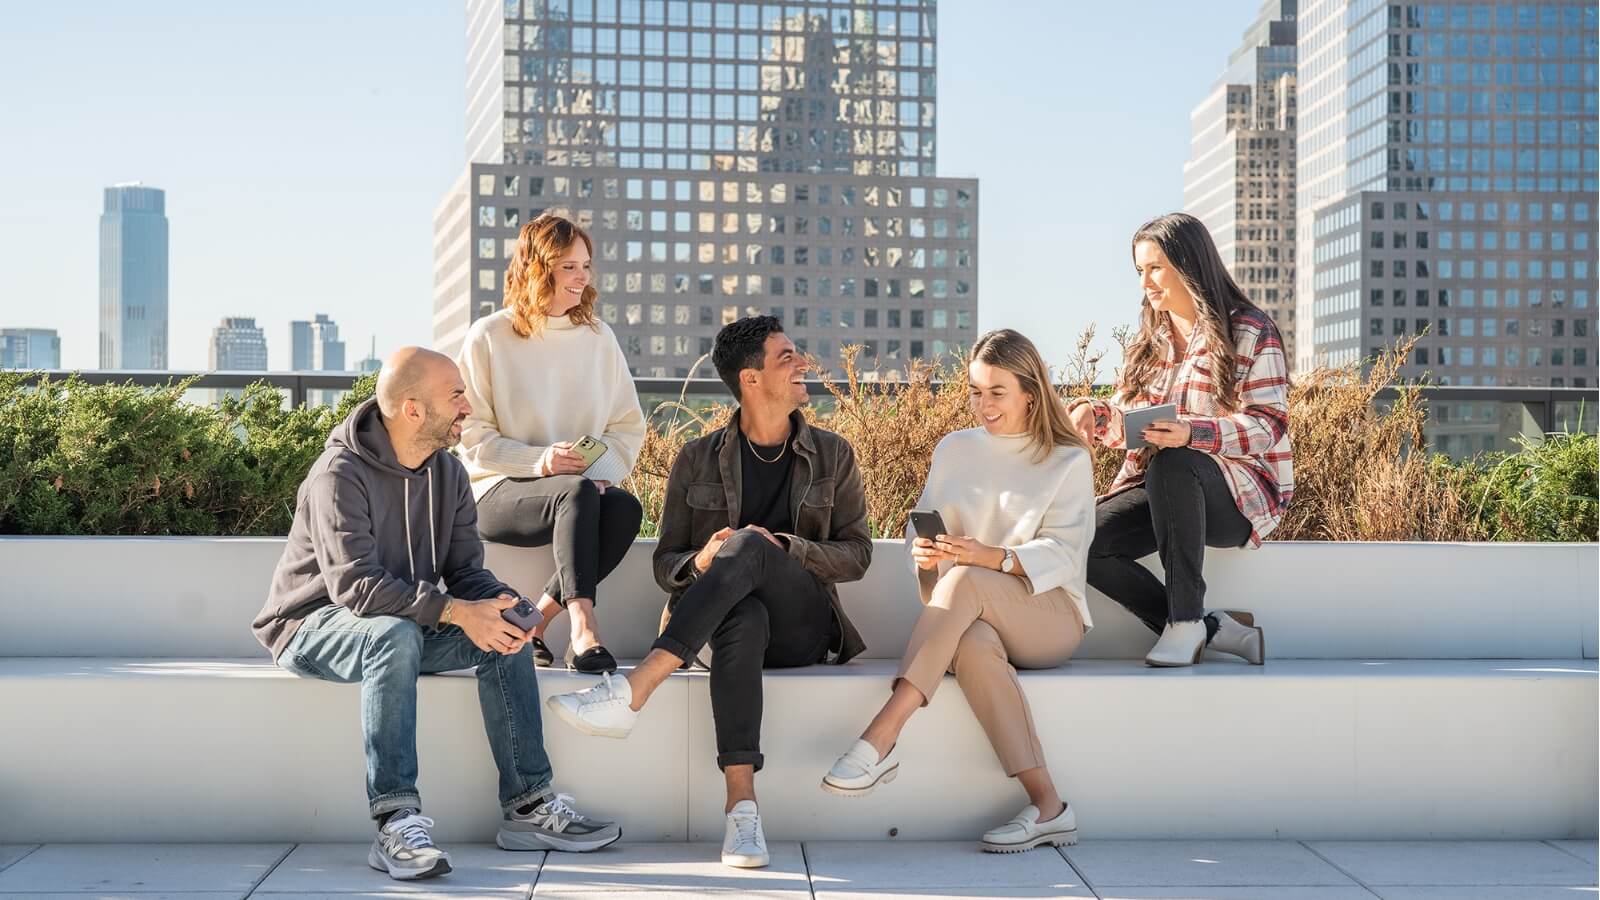 Index Exchange employees outside on bench